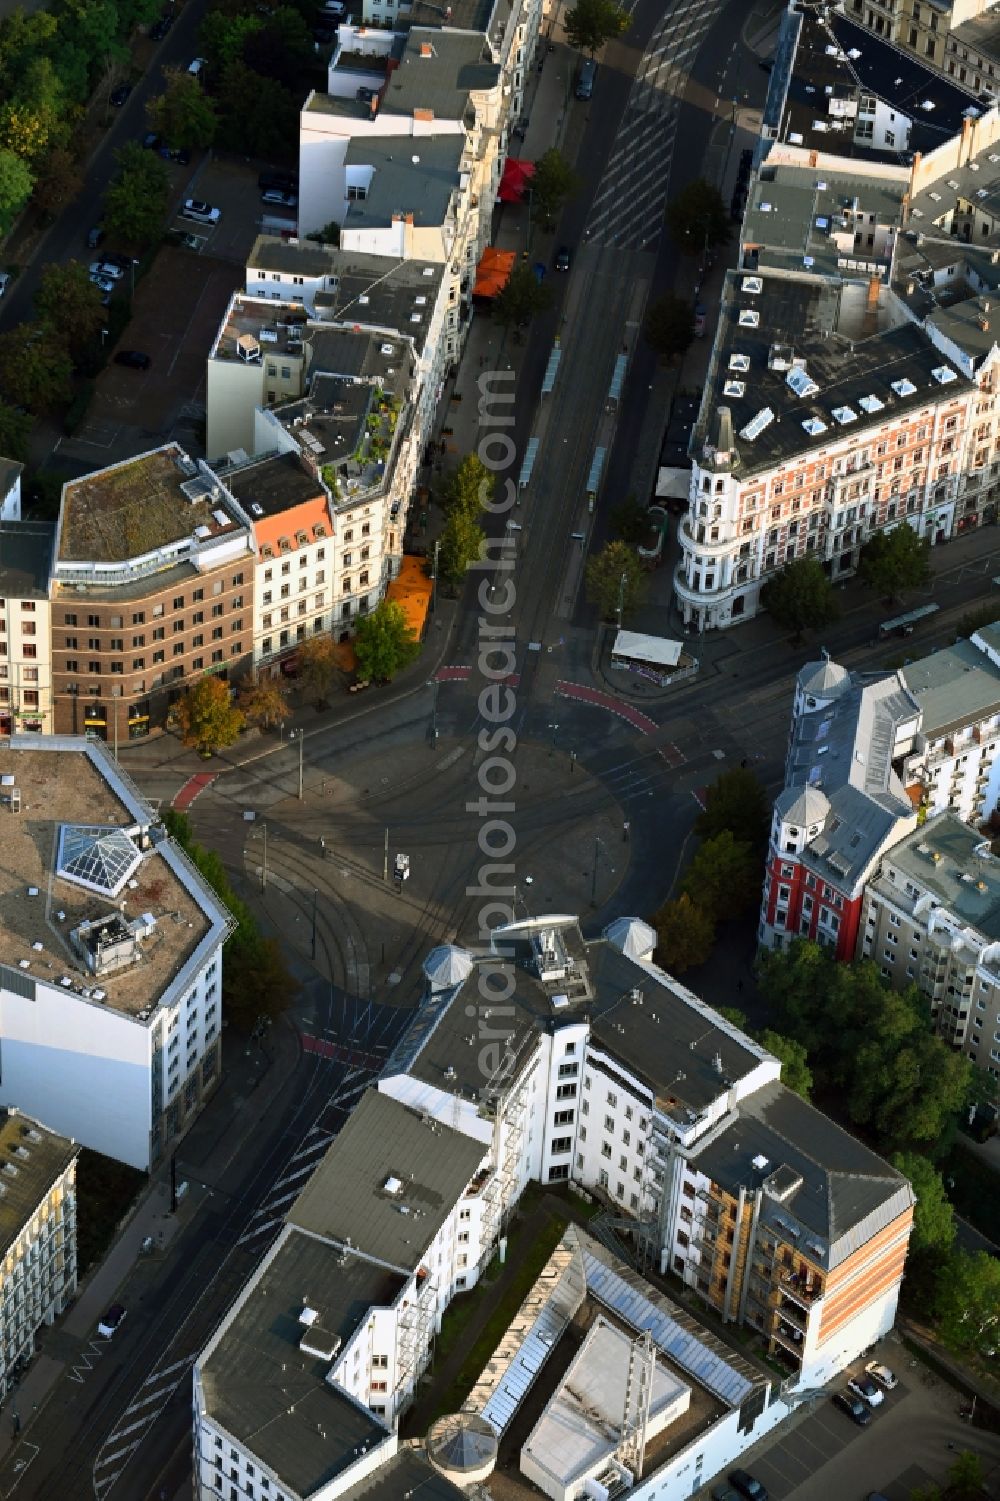 Magdeburg from above - Circular surface - Place Hasselbachplatz in the district Altstadt in Magdeburg in the state Saxony-Anhalt, Germany